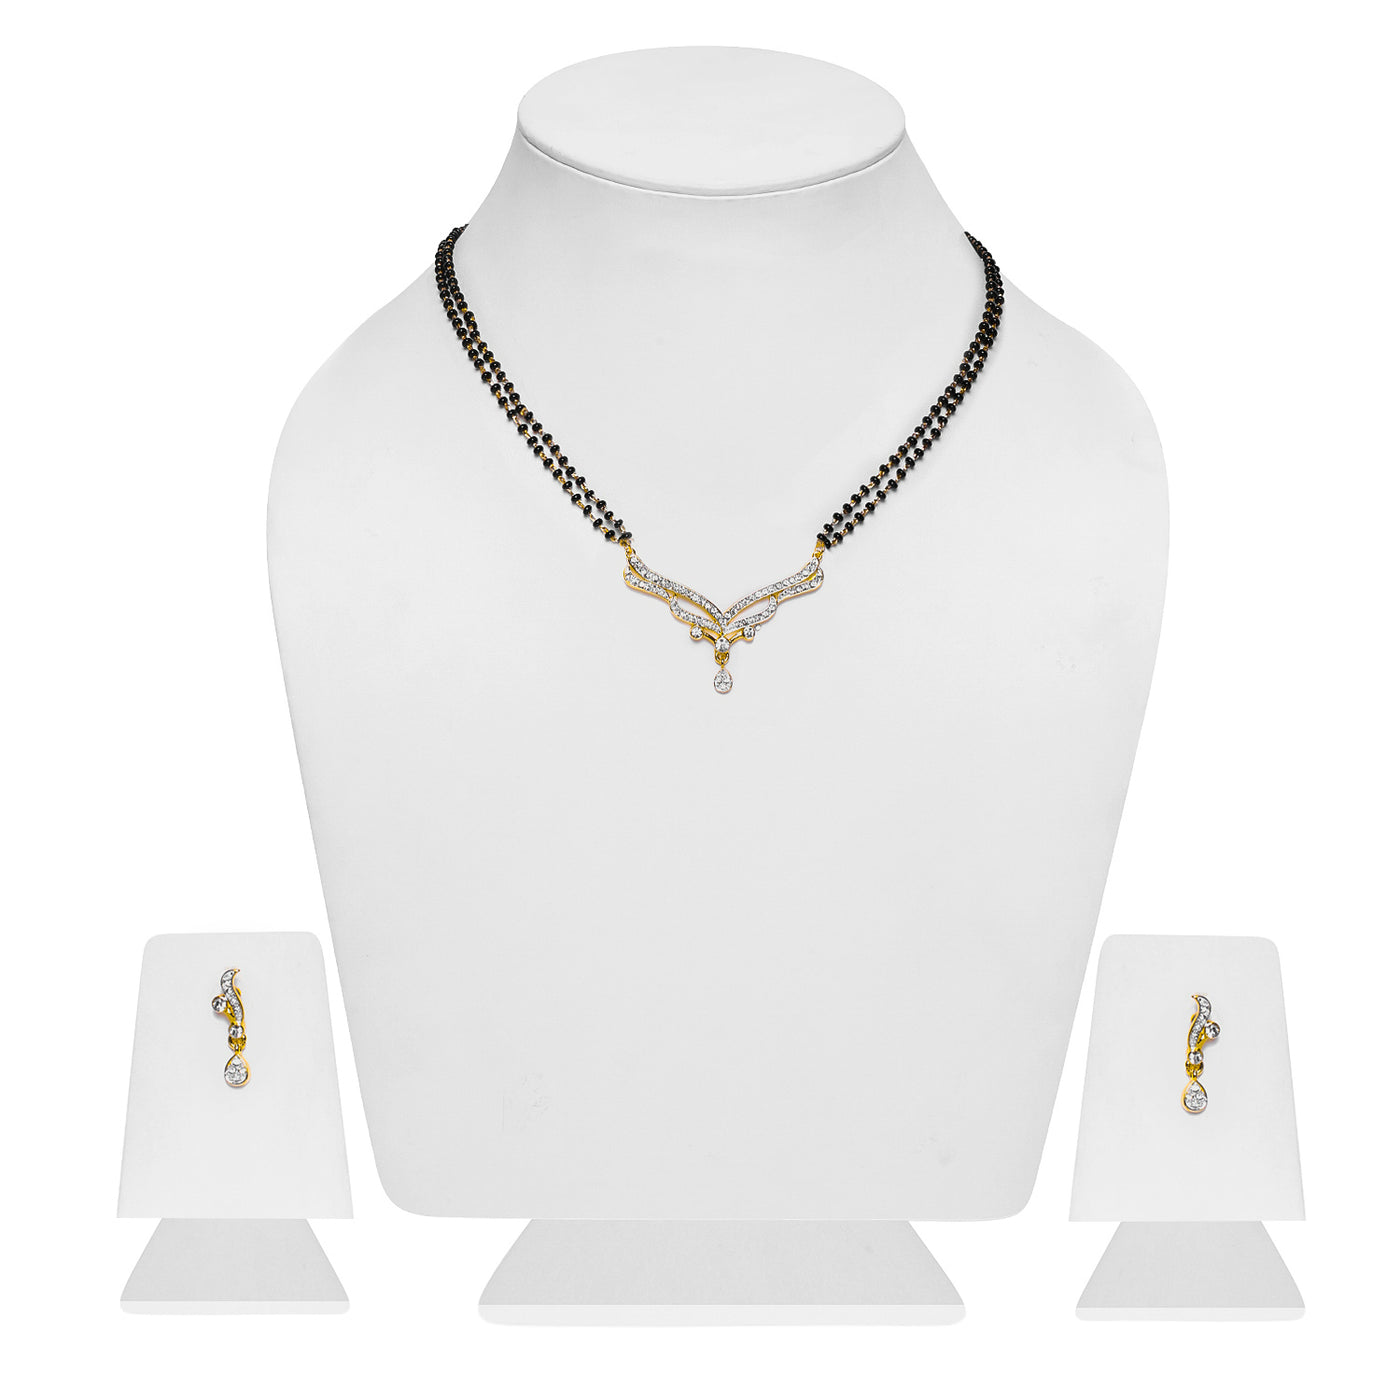 Estele Gold Plated Glaze Drop Mangalsutra Necklace Set with Austrian Crystals for Women